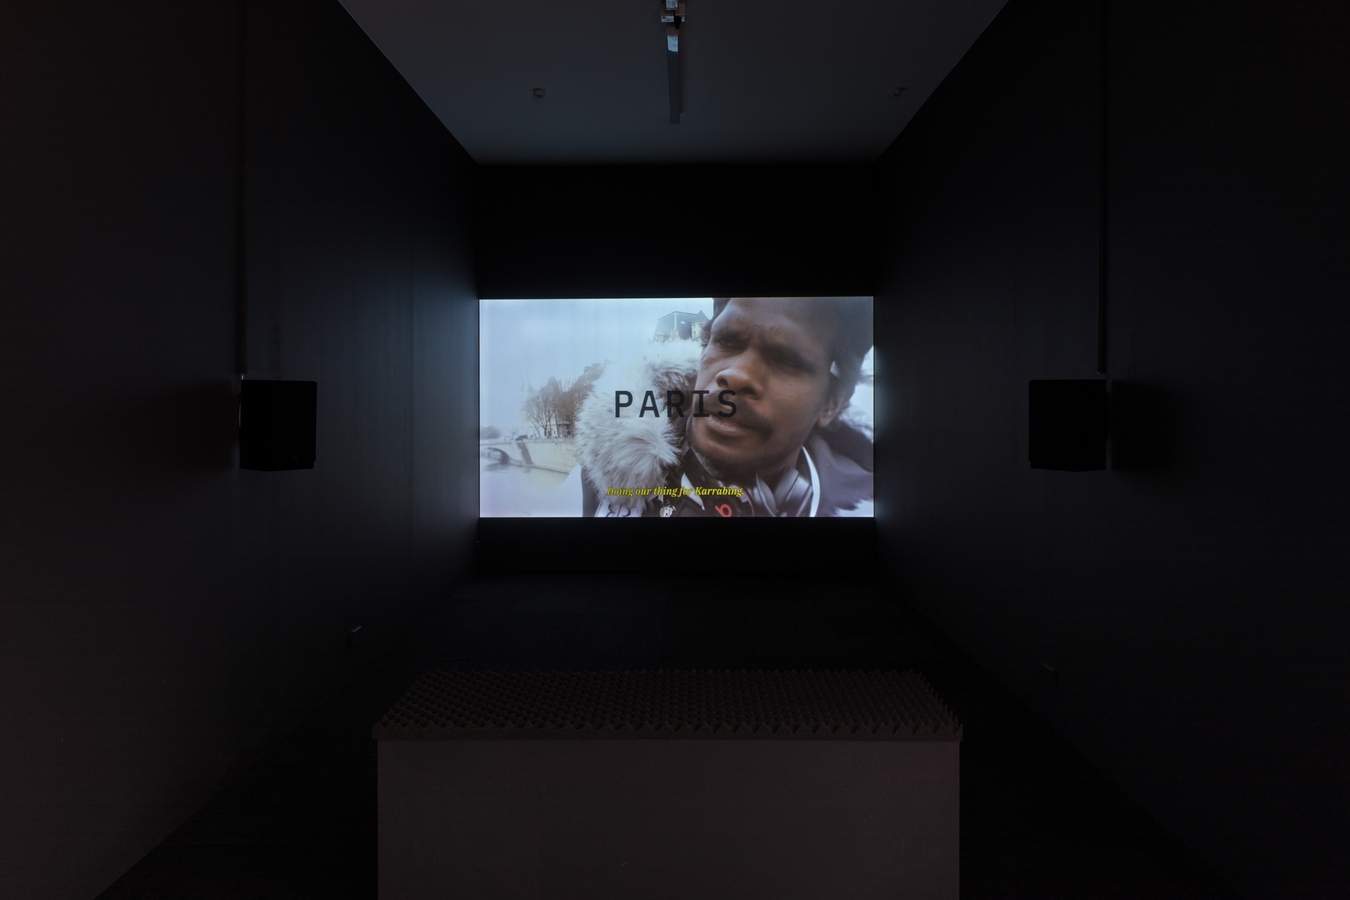 Image: Karrabing Film Collective, Day in the Life (installation view), 2020. Part of Programme 2 curated by Michelle Wang. Photo: Janneth Gil.